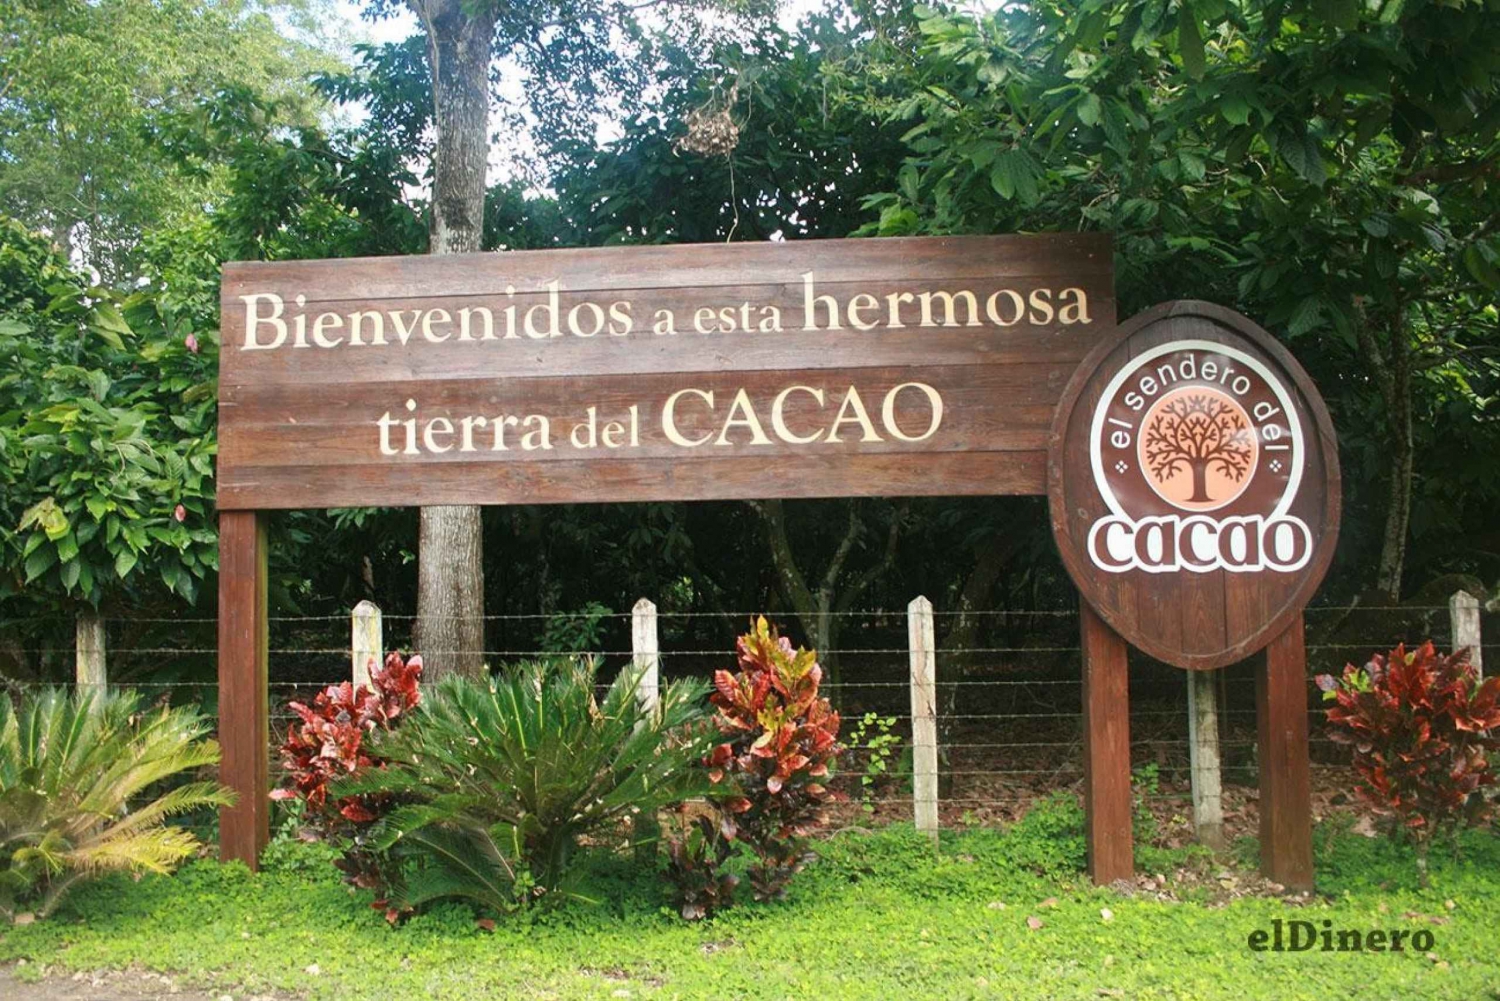 Cocoa Trail & Making of Chocolate Tour from Santo Domingo